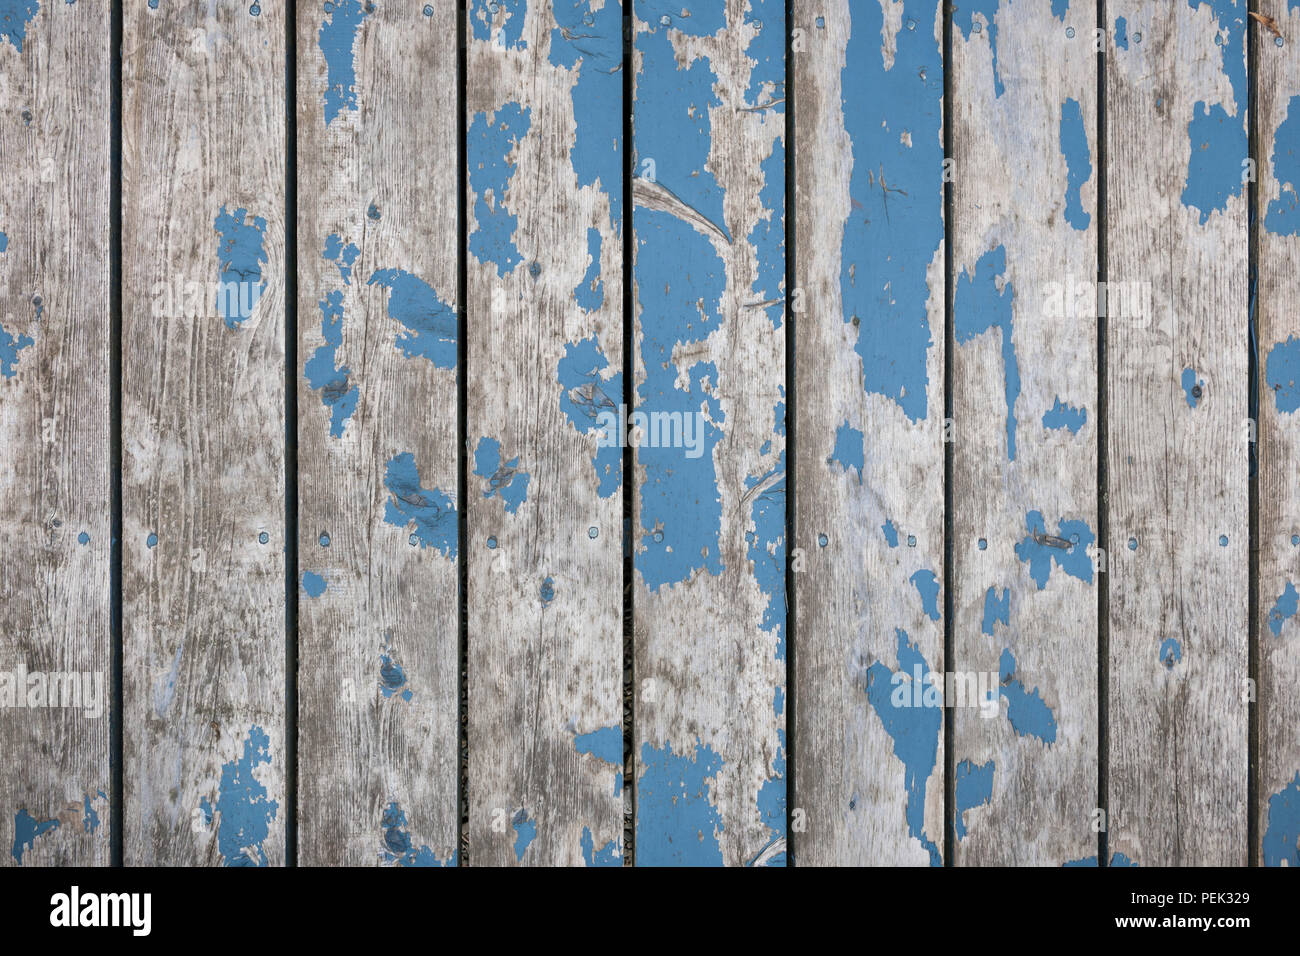 Rustic background of weathered wooden boards with traces of old blue paint Stock Photo